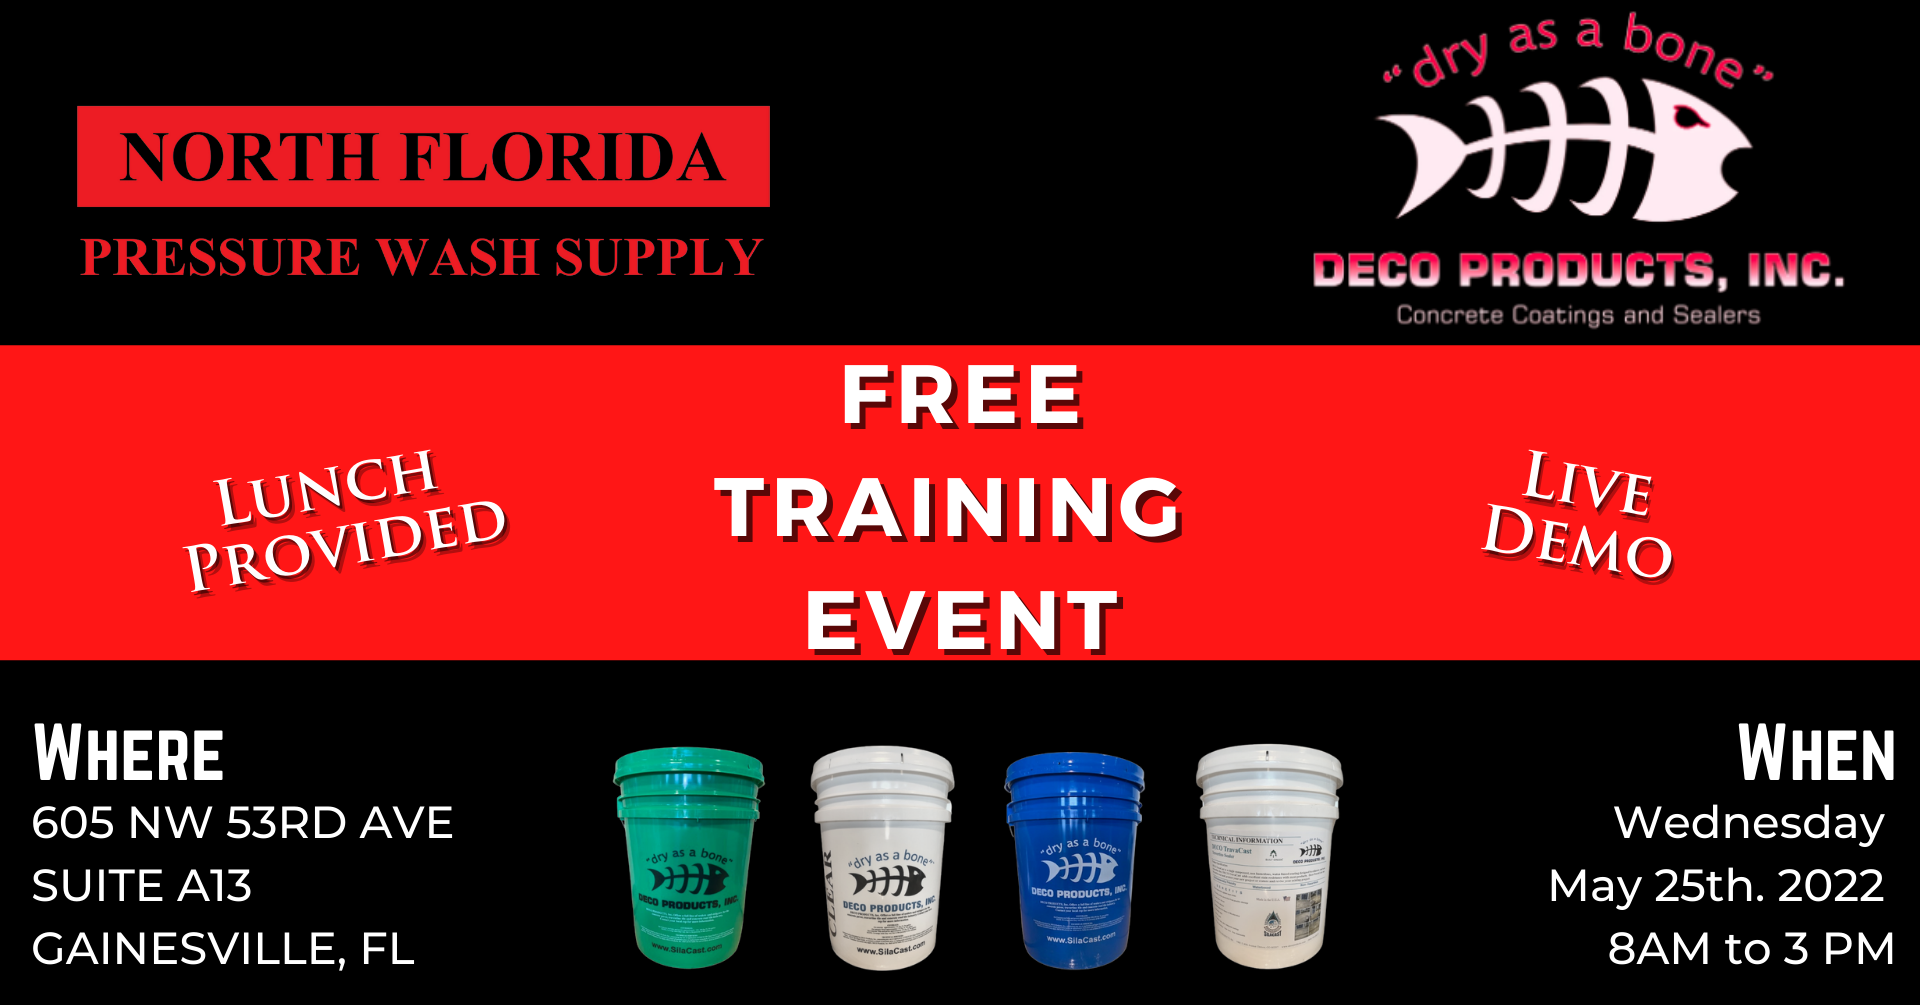 a flyer promoting a free training event in North Florida